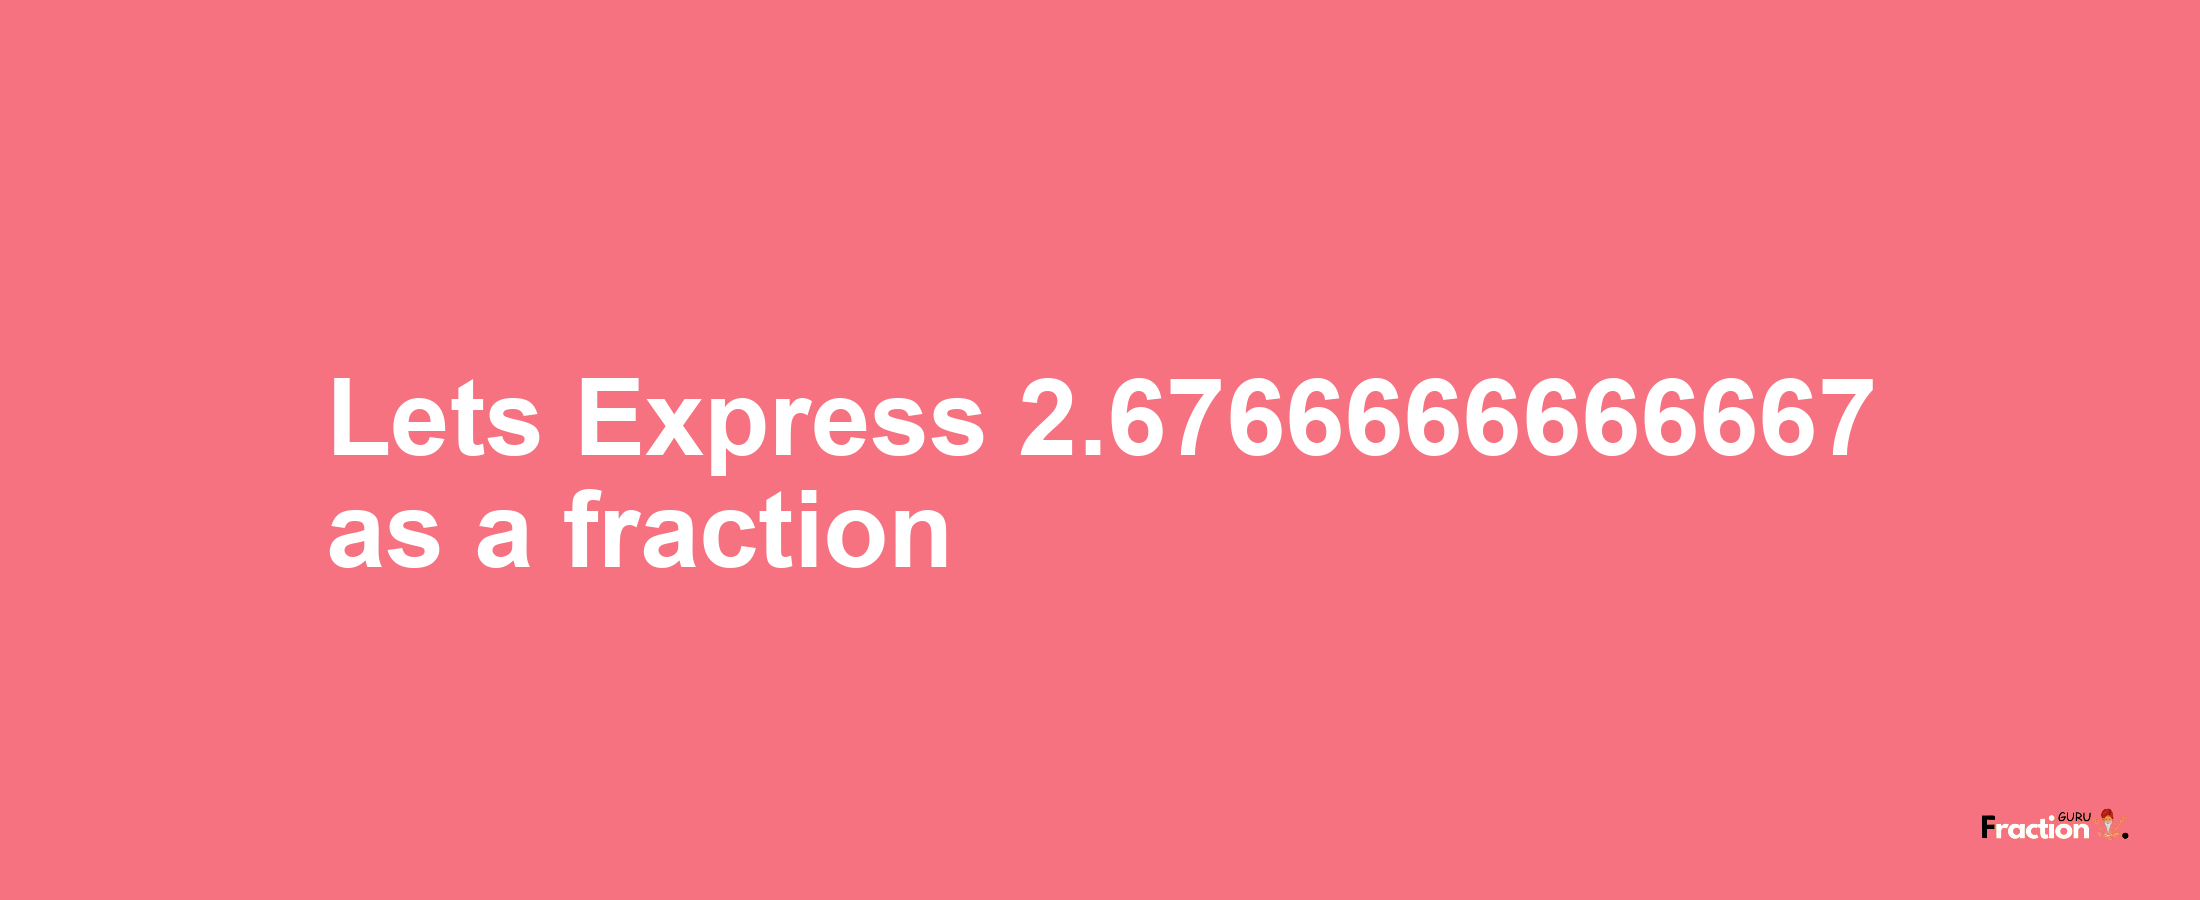 Lets Express 2.6766666666667 as afraction